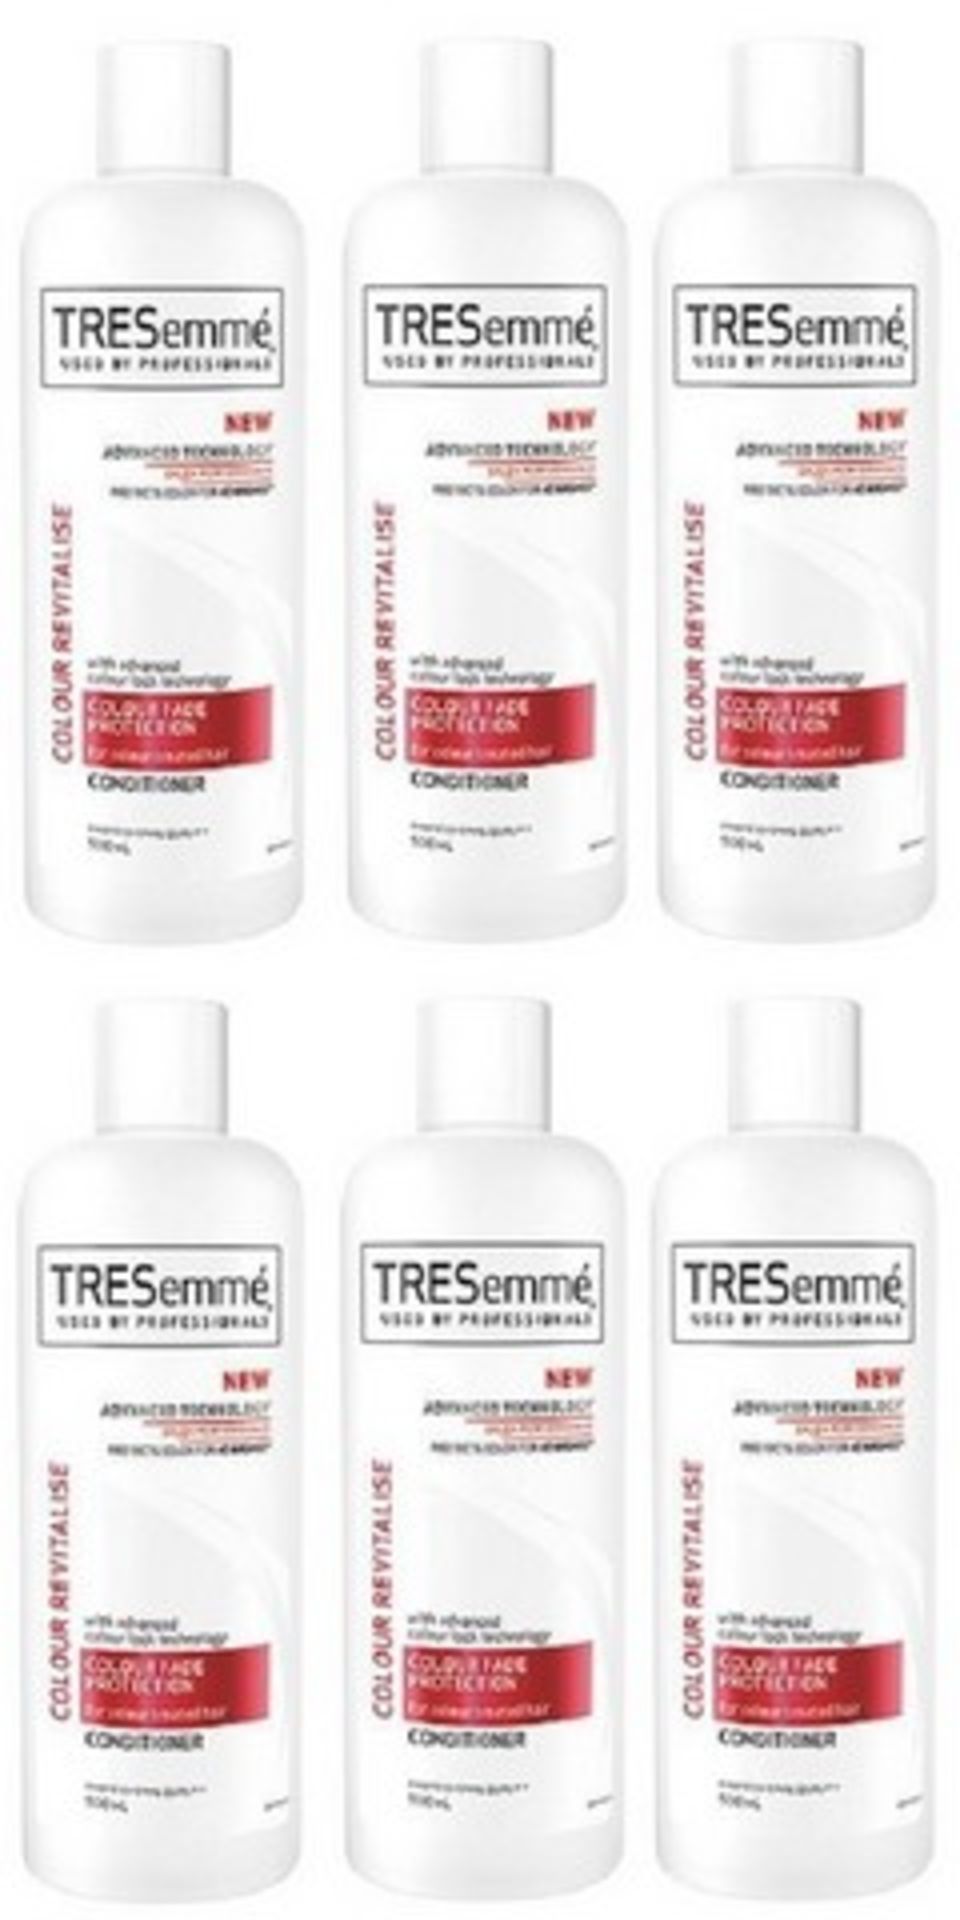 V Brand New Lot Of 6 TRESemme Professional Colour Fade Protection Conditioner 500ml For Colour